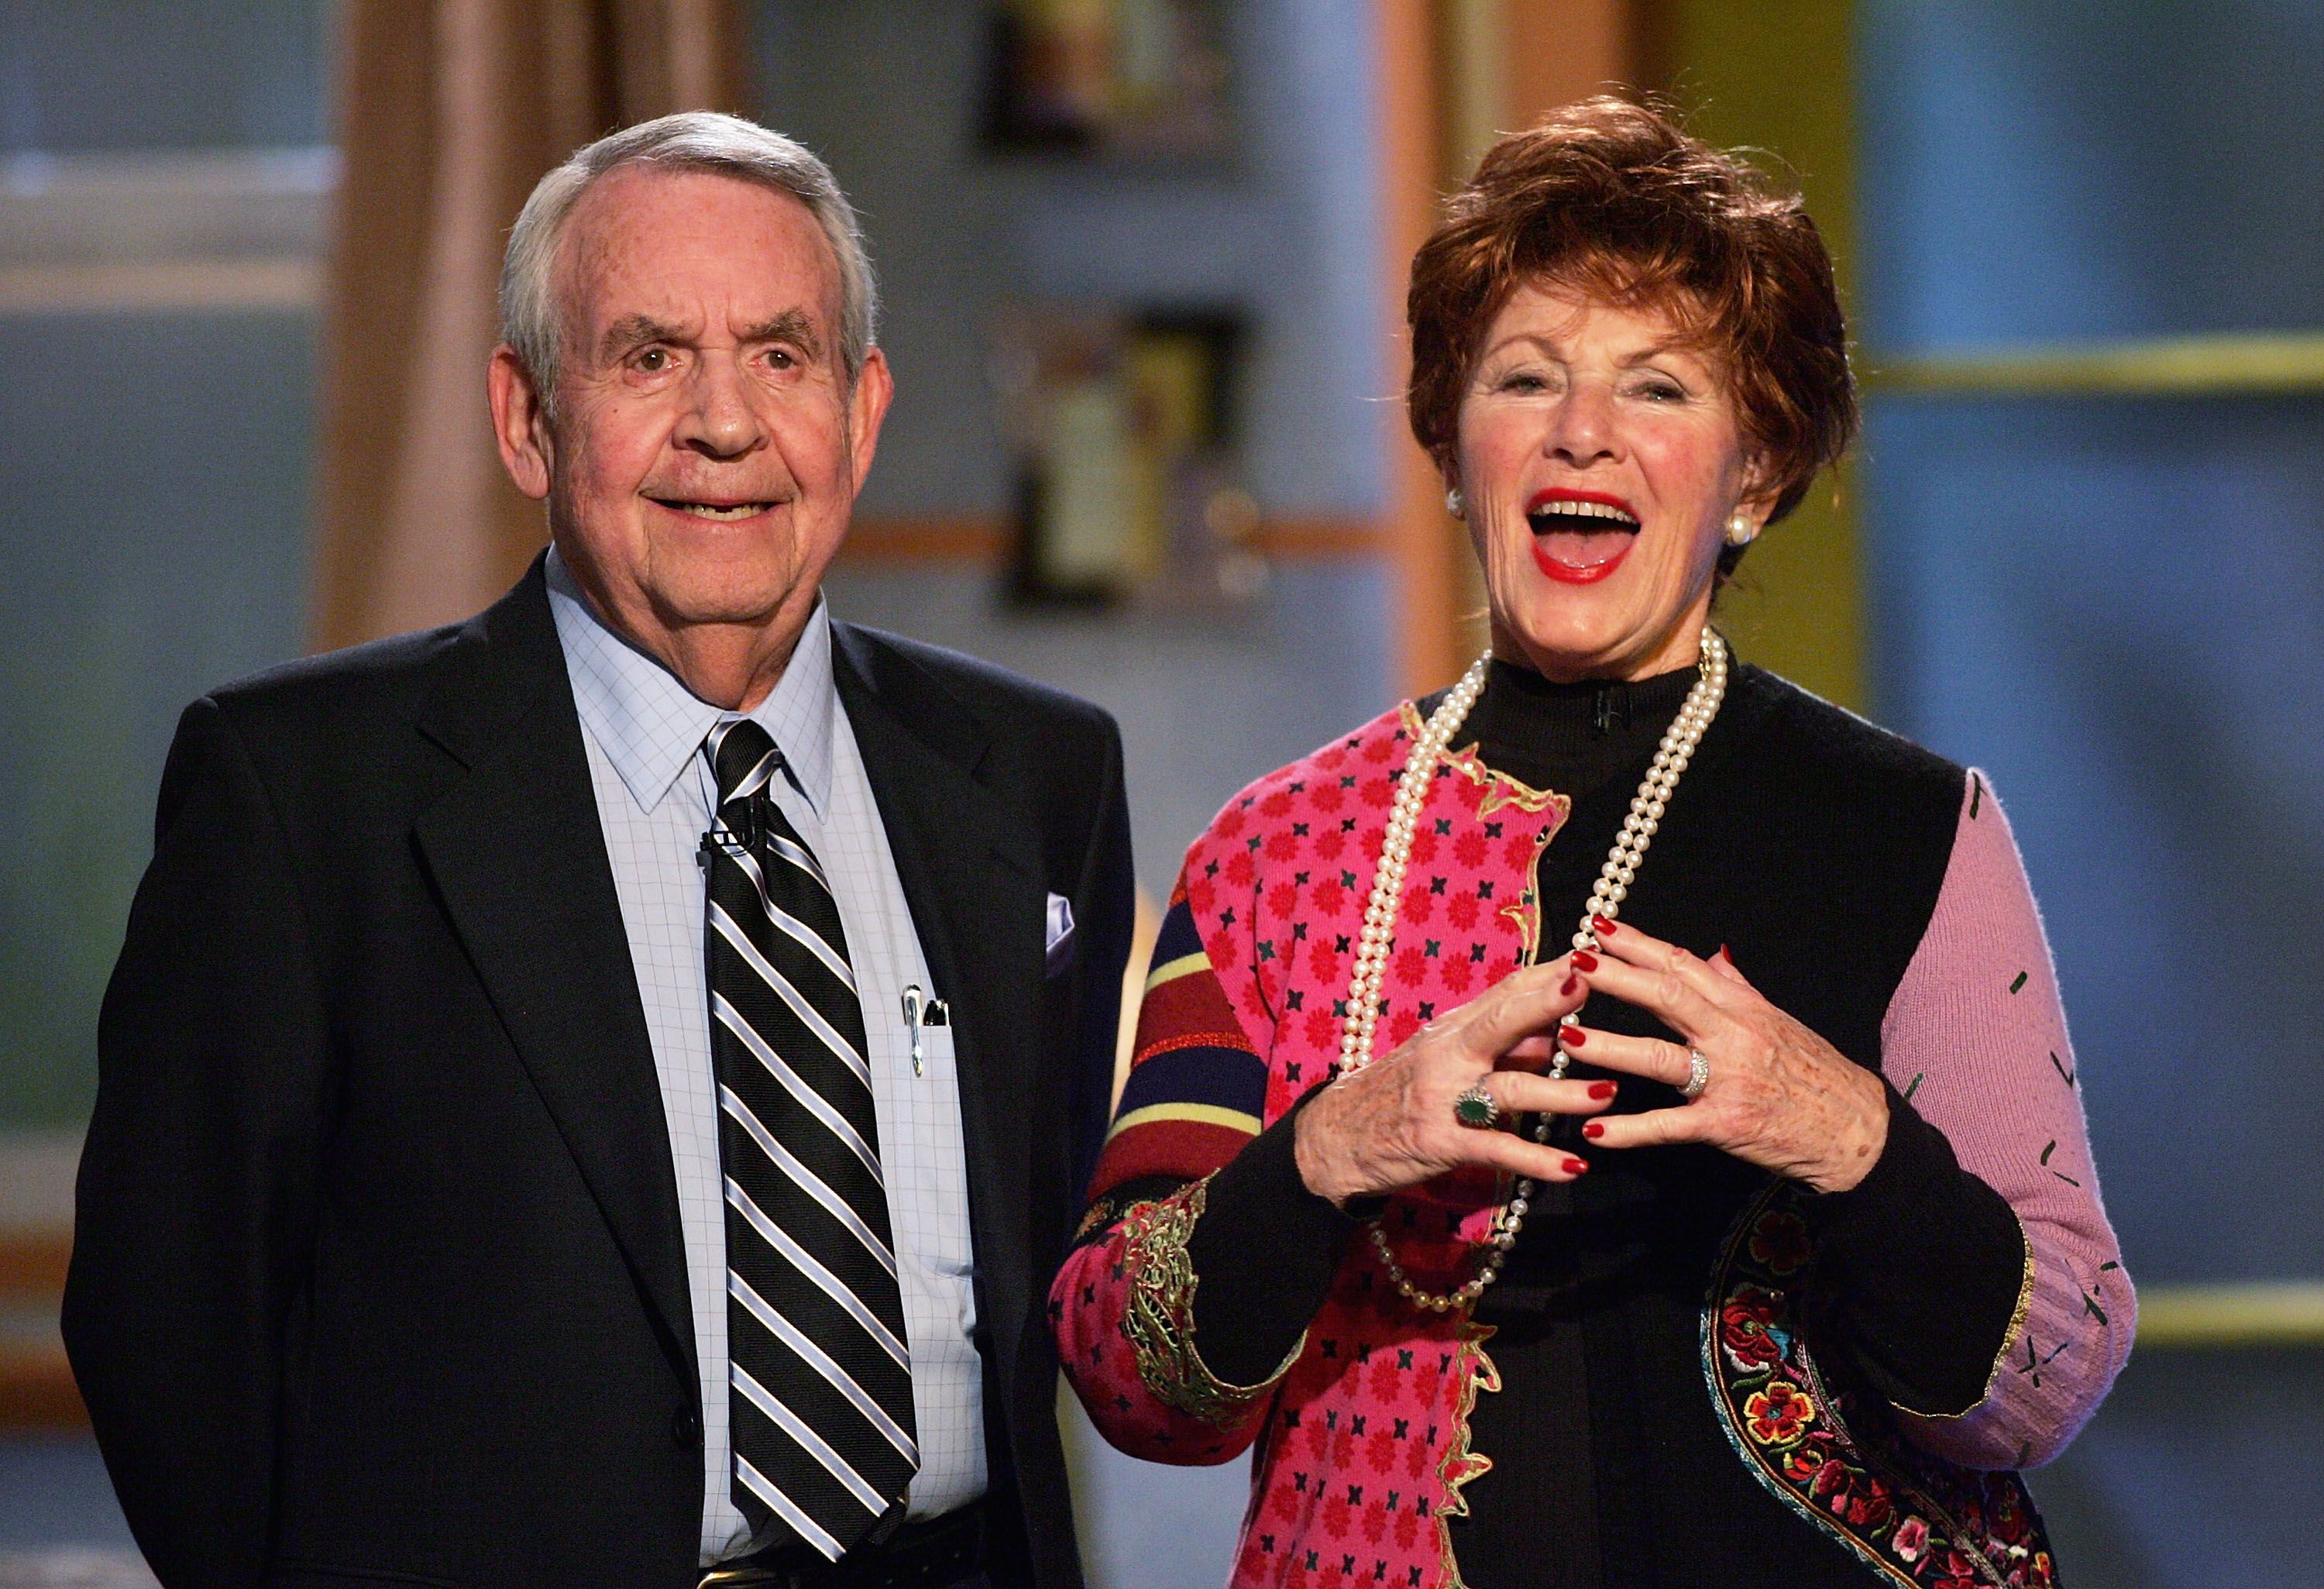 Tom Bosley and "Happy Days" co-star Marion Ross at the 6th Annual Family Television Awards on December 1, 2004 | Source: Getty Images